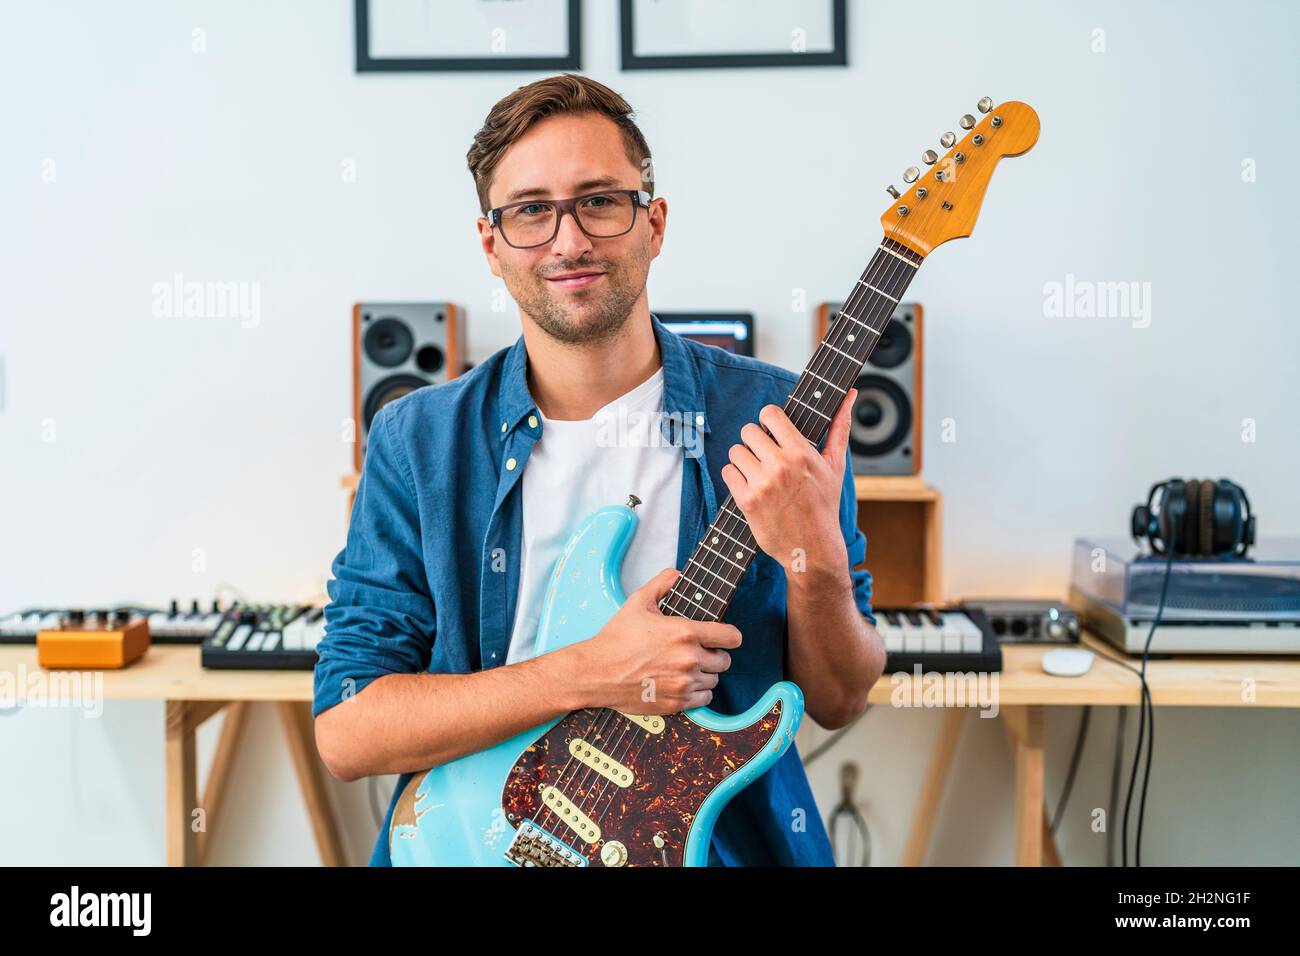 Male guitarist wearing eyeglasses holding guitar at home Stock Photo